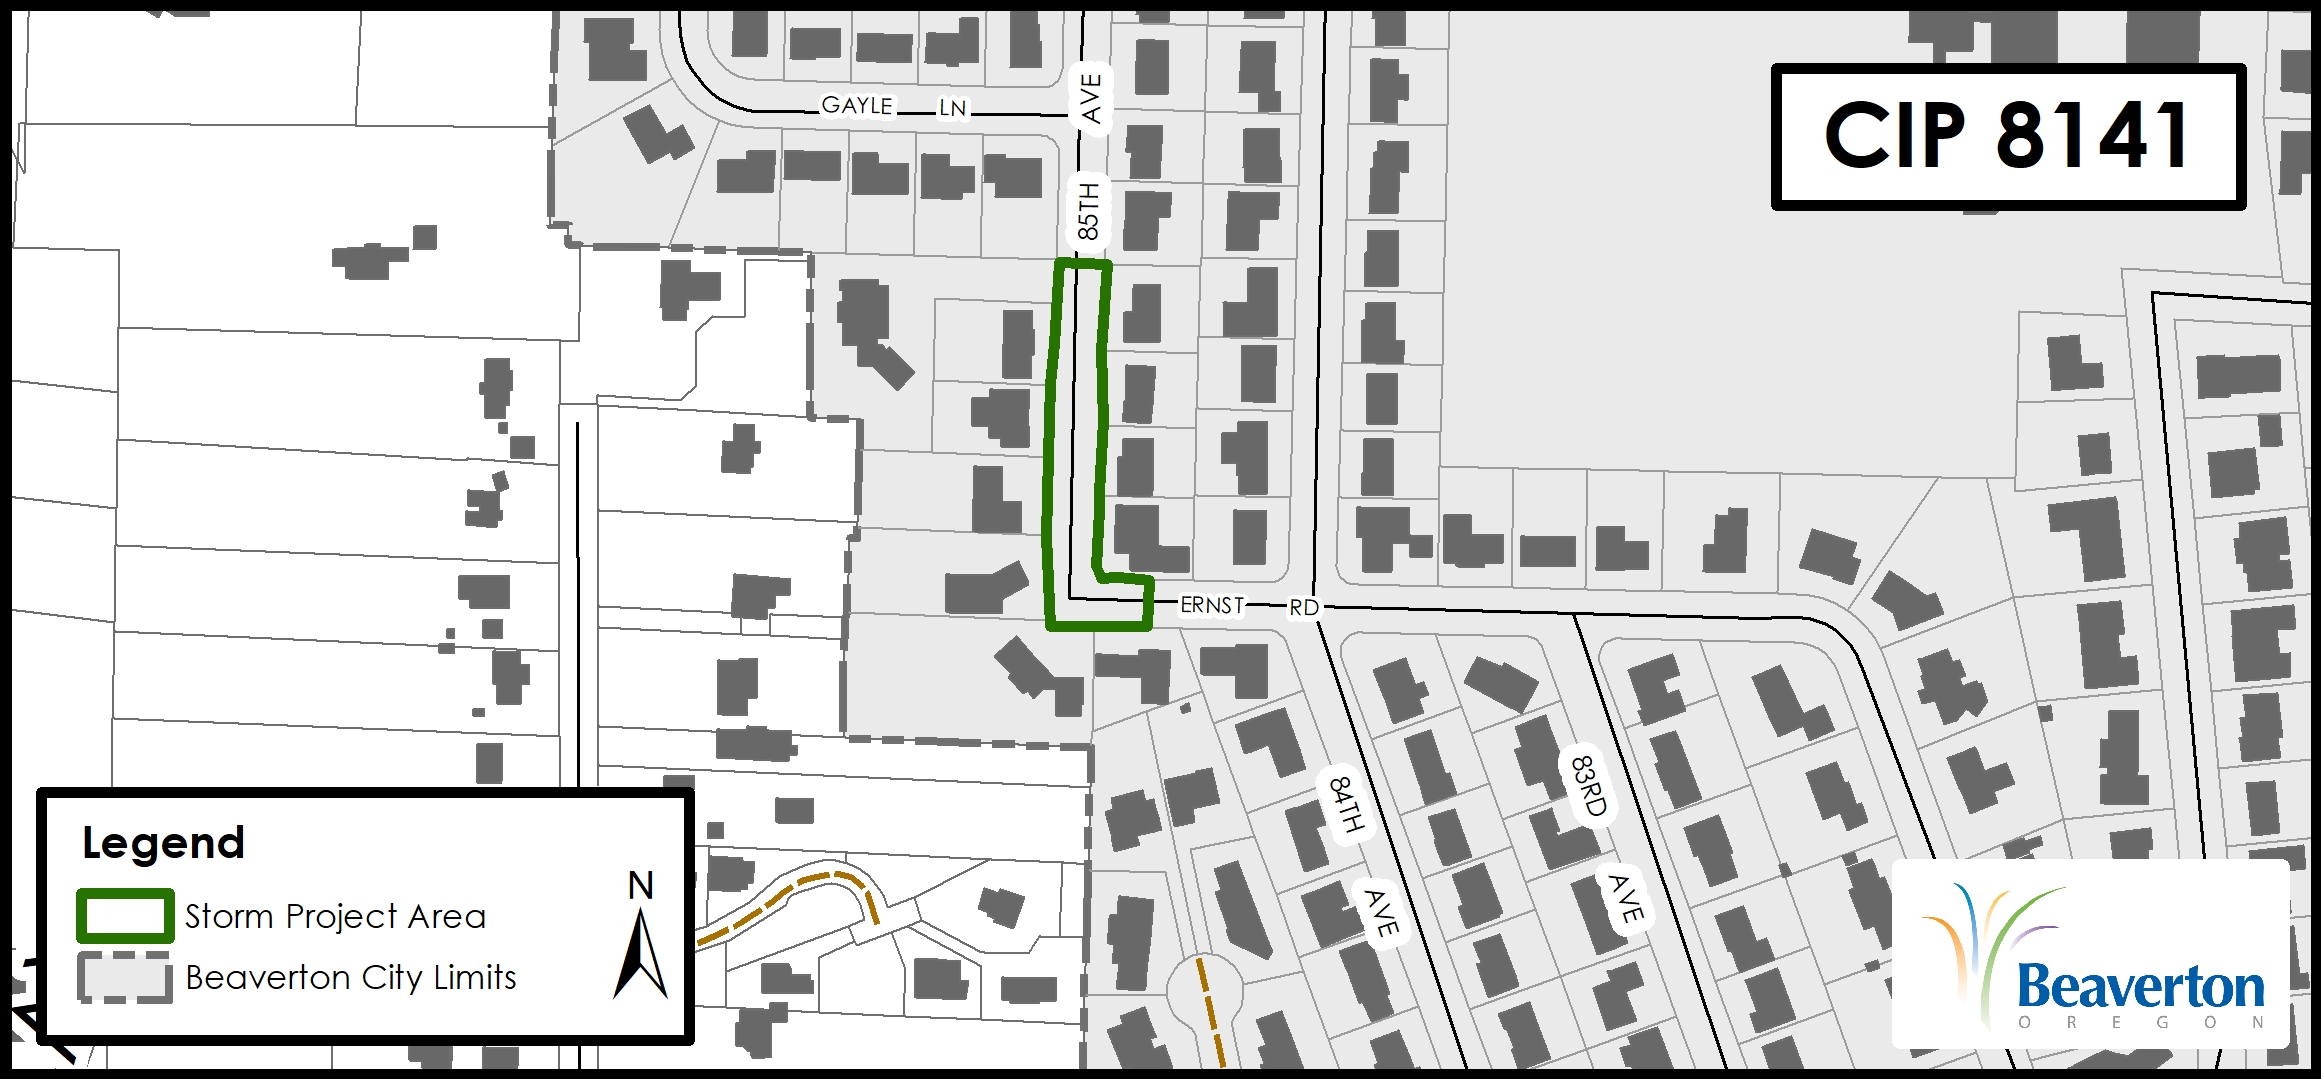 Storm Capital Improvement Project for sections of SW 85th Avenue and SW Ernst Road.